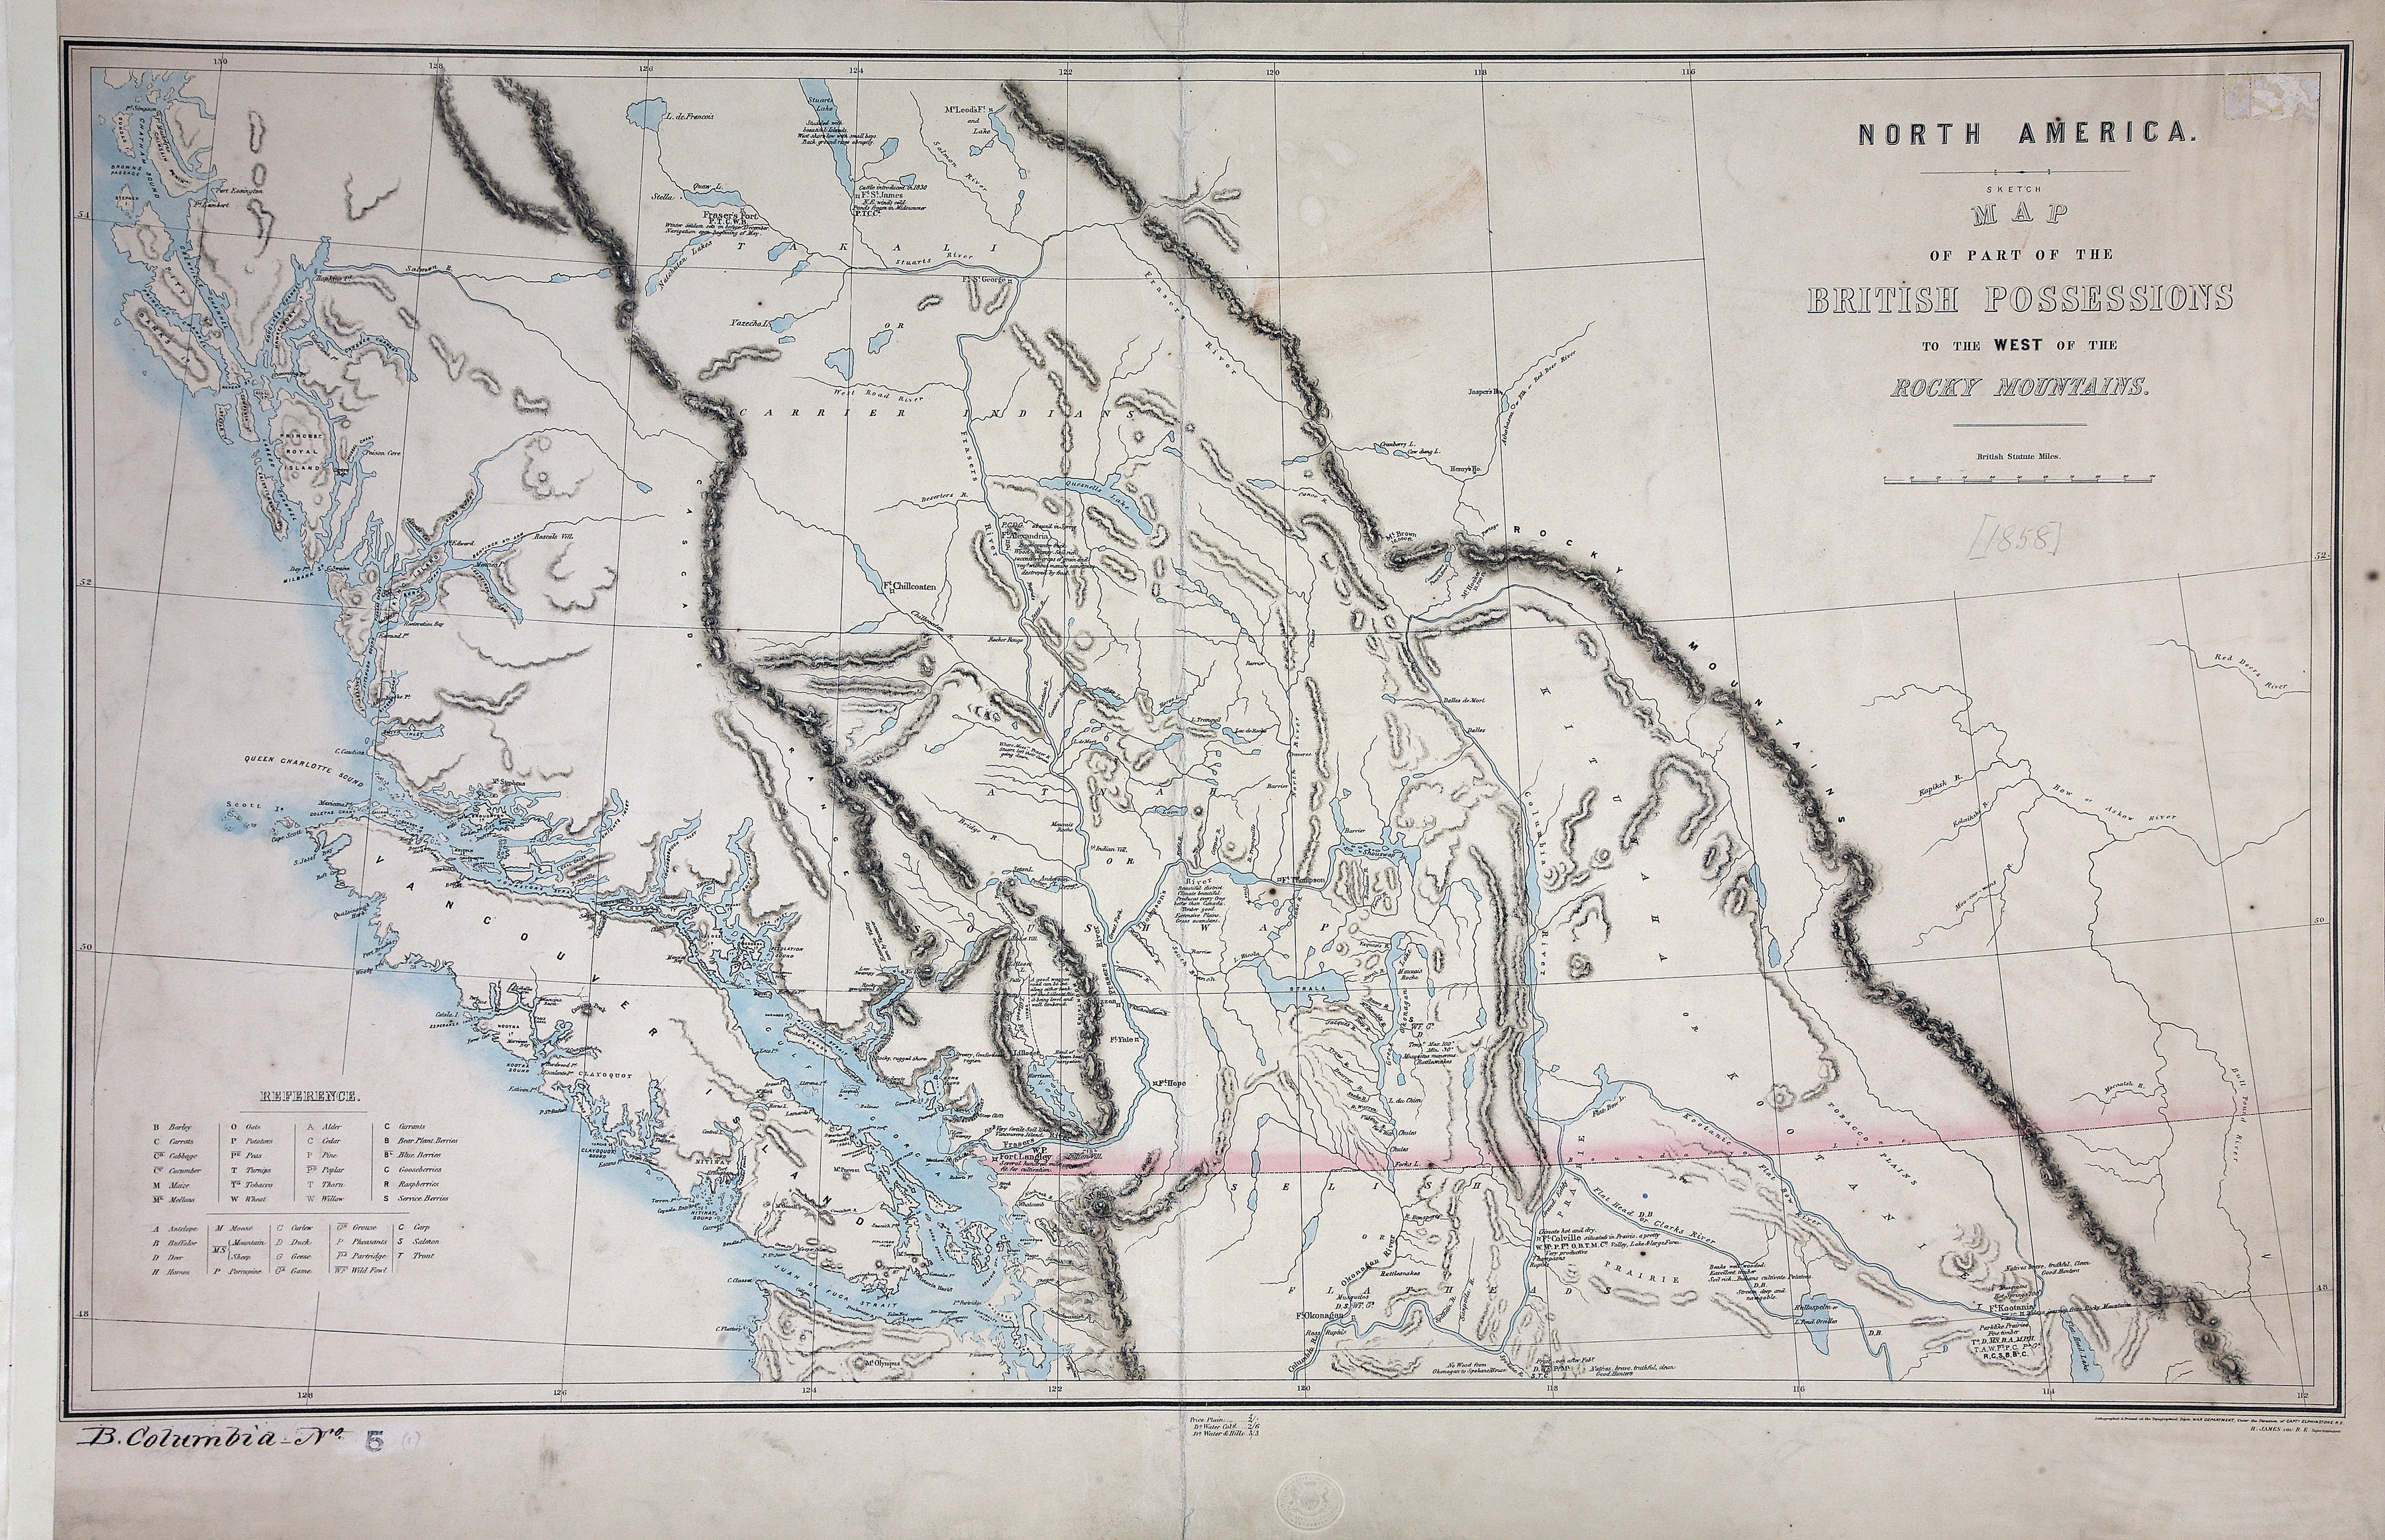 Sketch map of part of the British possessions to the west of the Rocky Mountains.